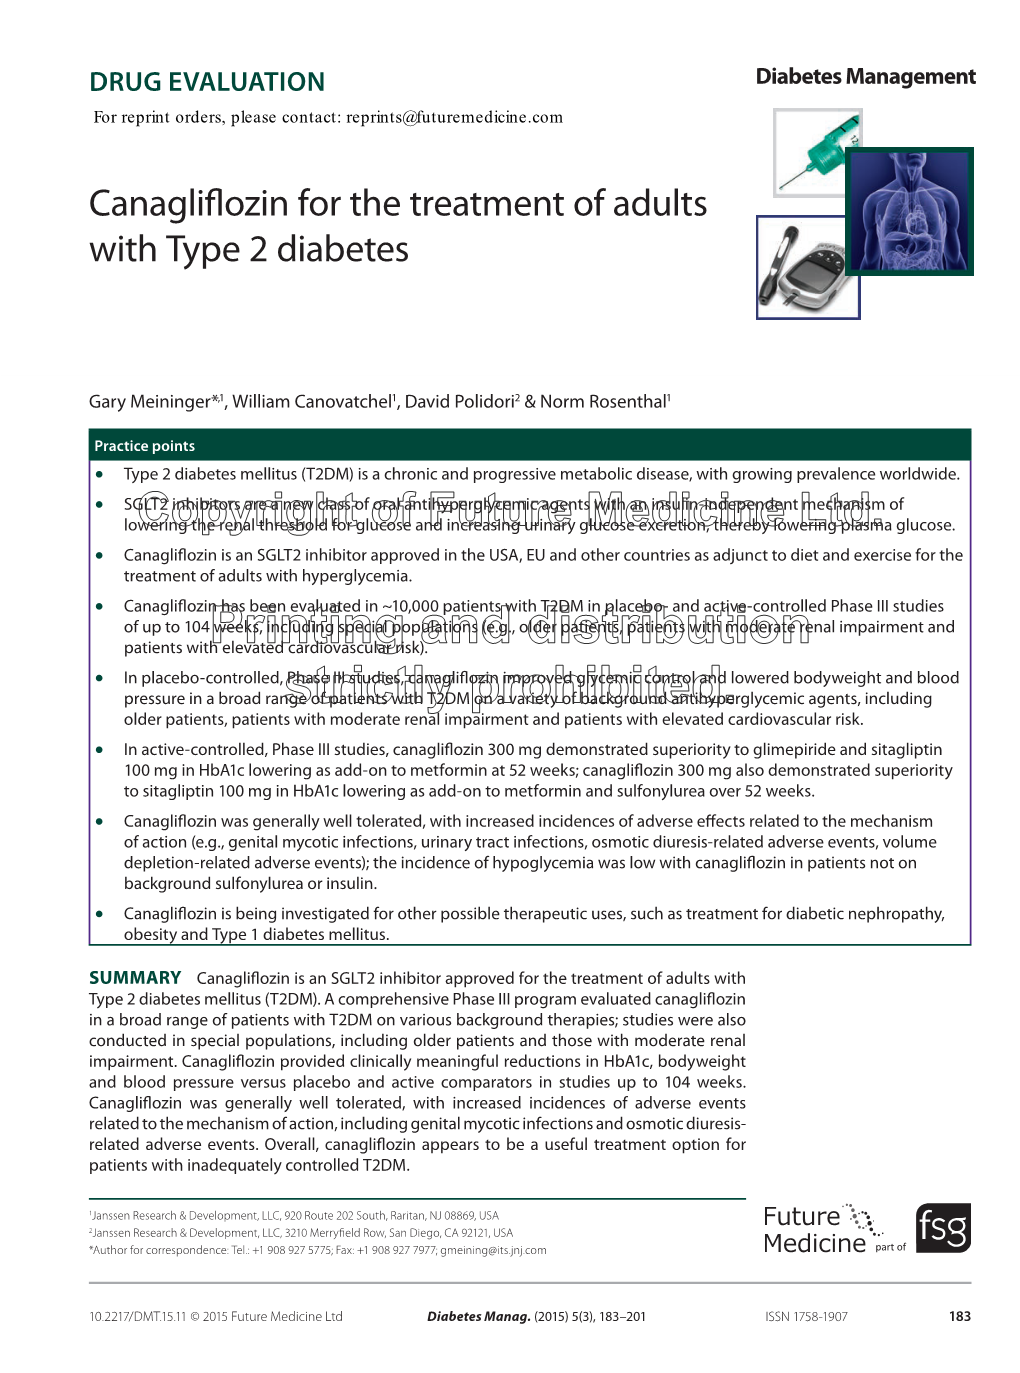 Canagliflozin for the Treatment of Adults with Type 2 Diabetes